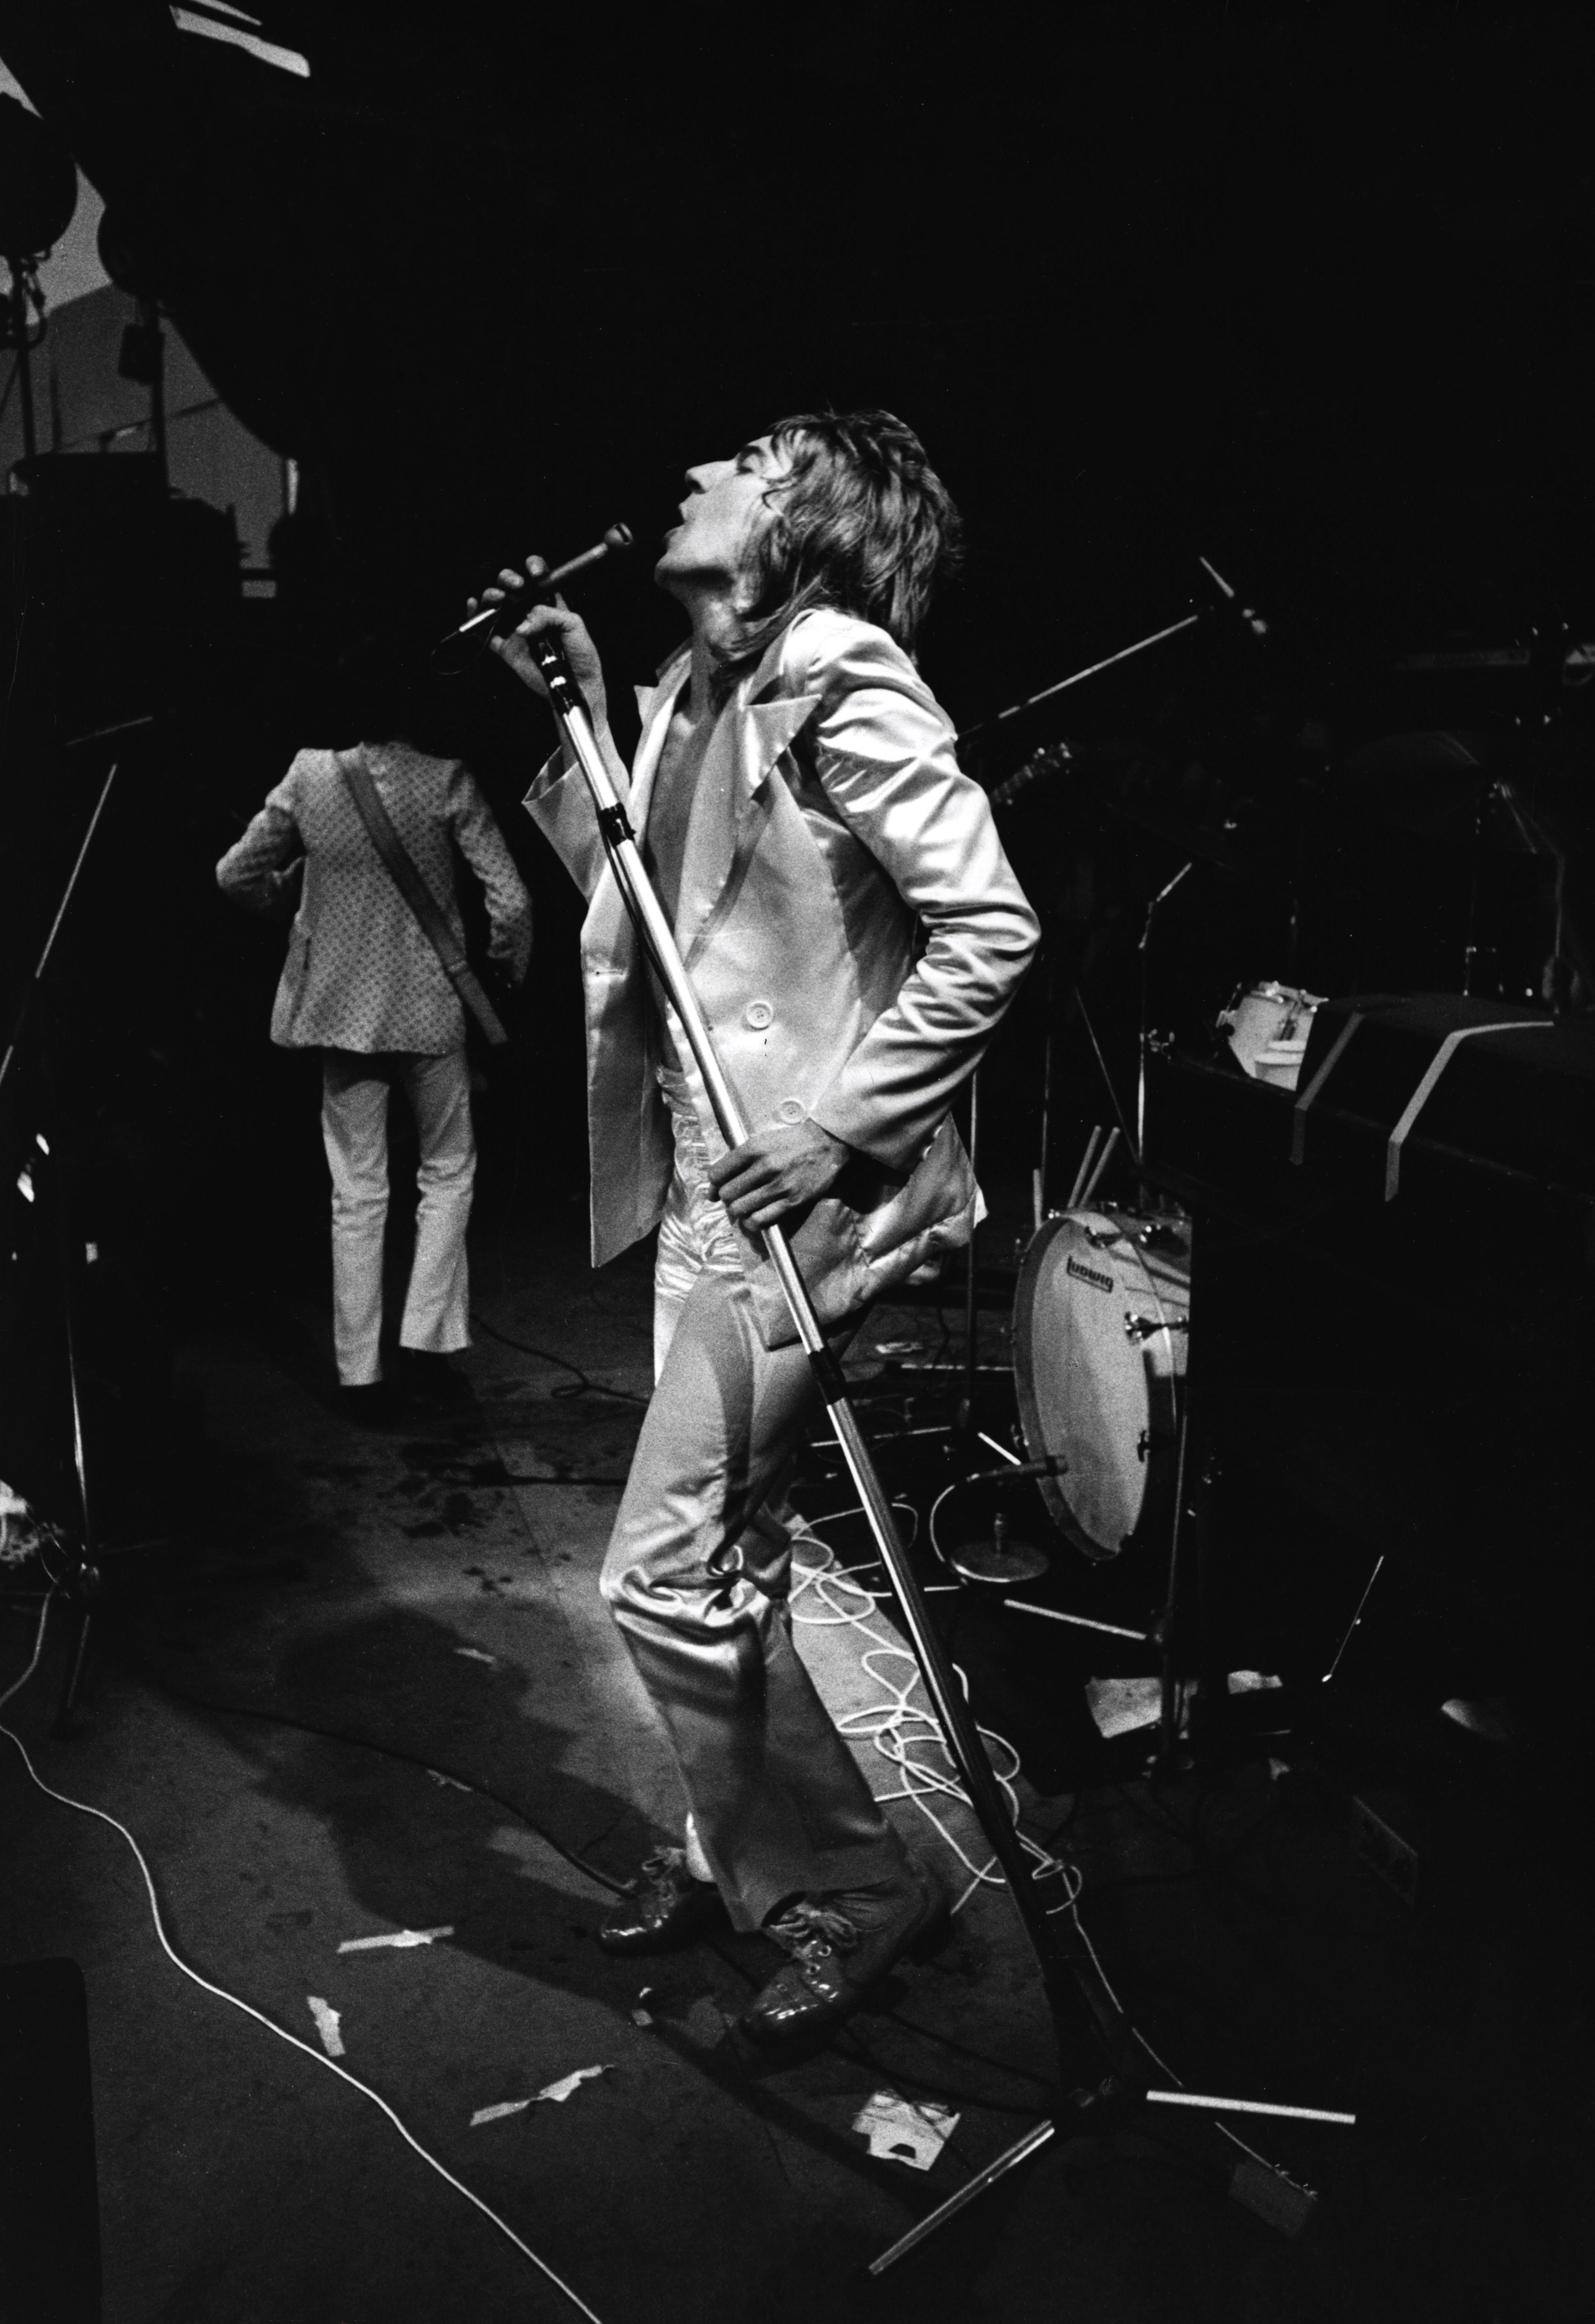 Michael Childers Black and White Photograph - Rod Stewart Rocking Out on Stage Fine Art Print